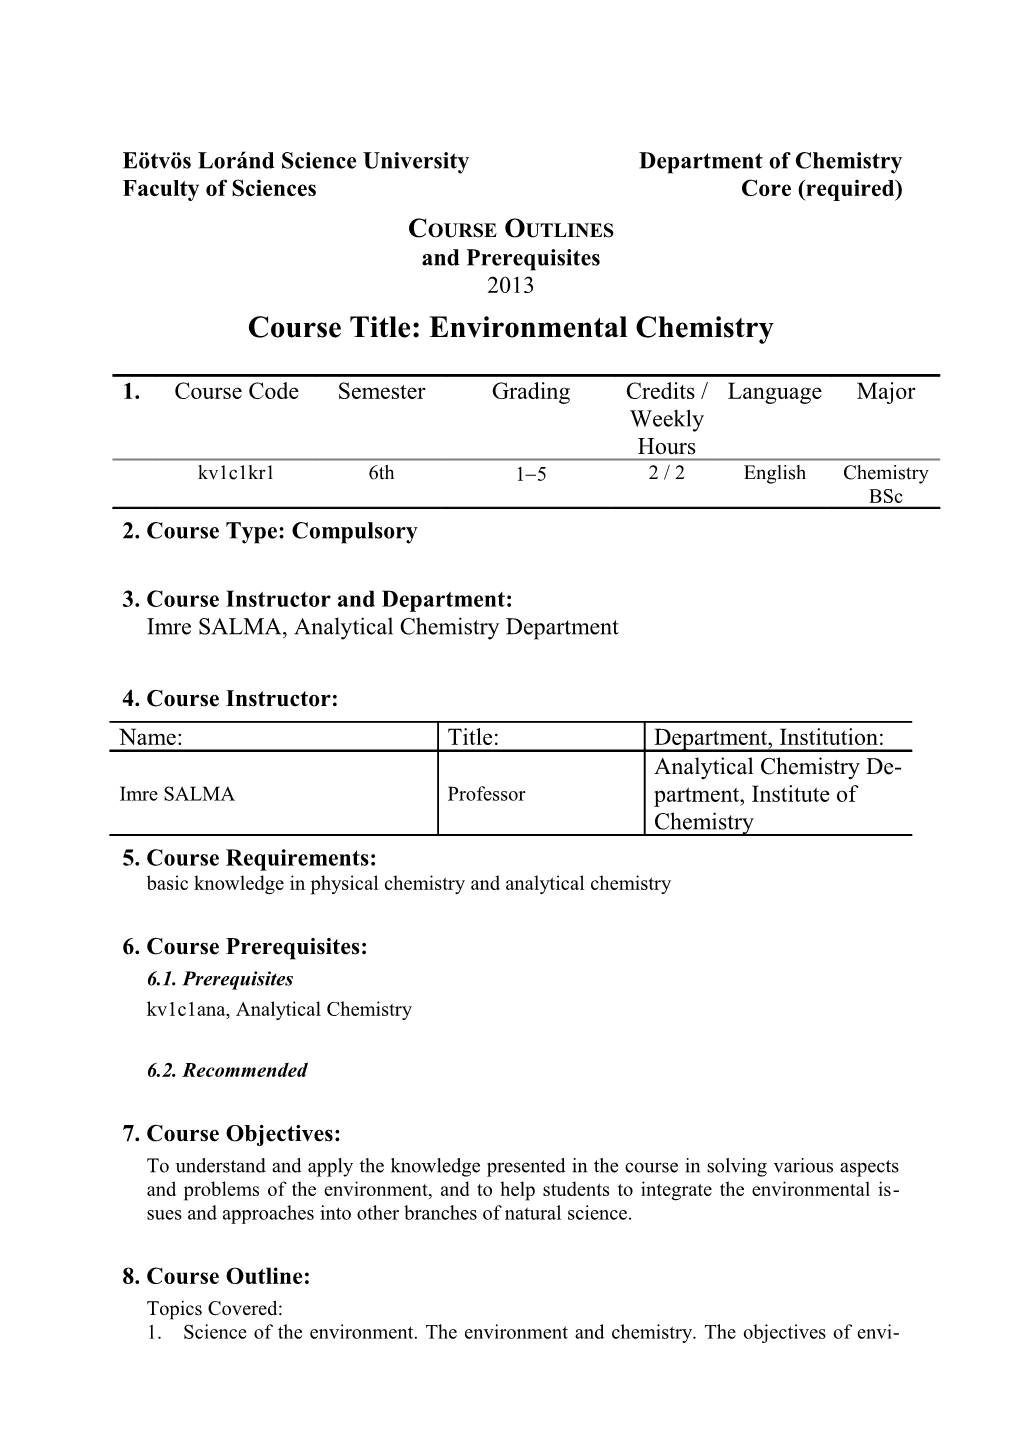 Course Title: Environmental Chemistry